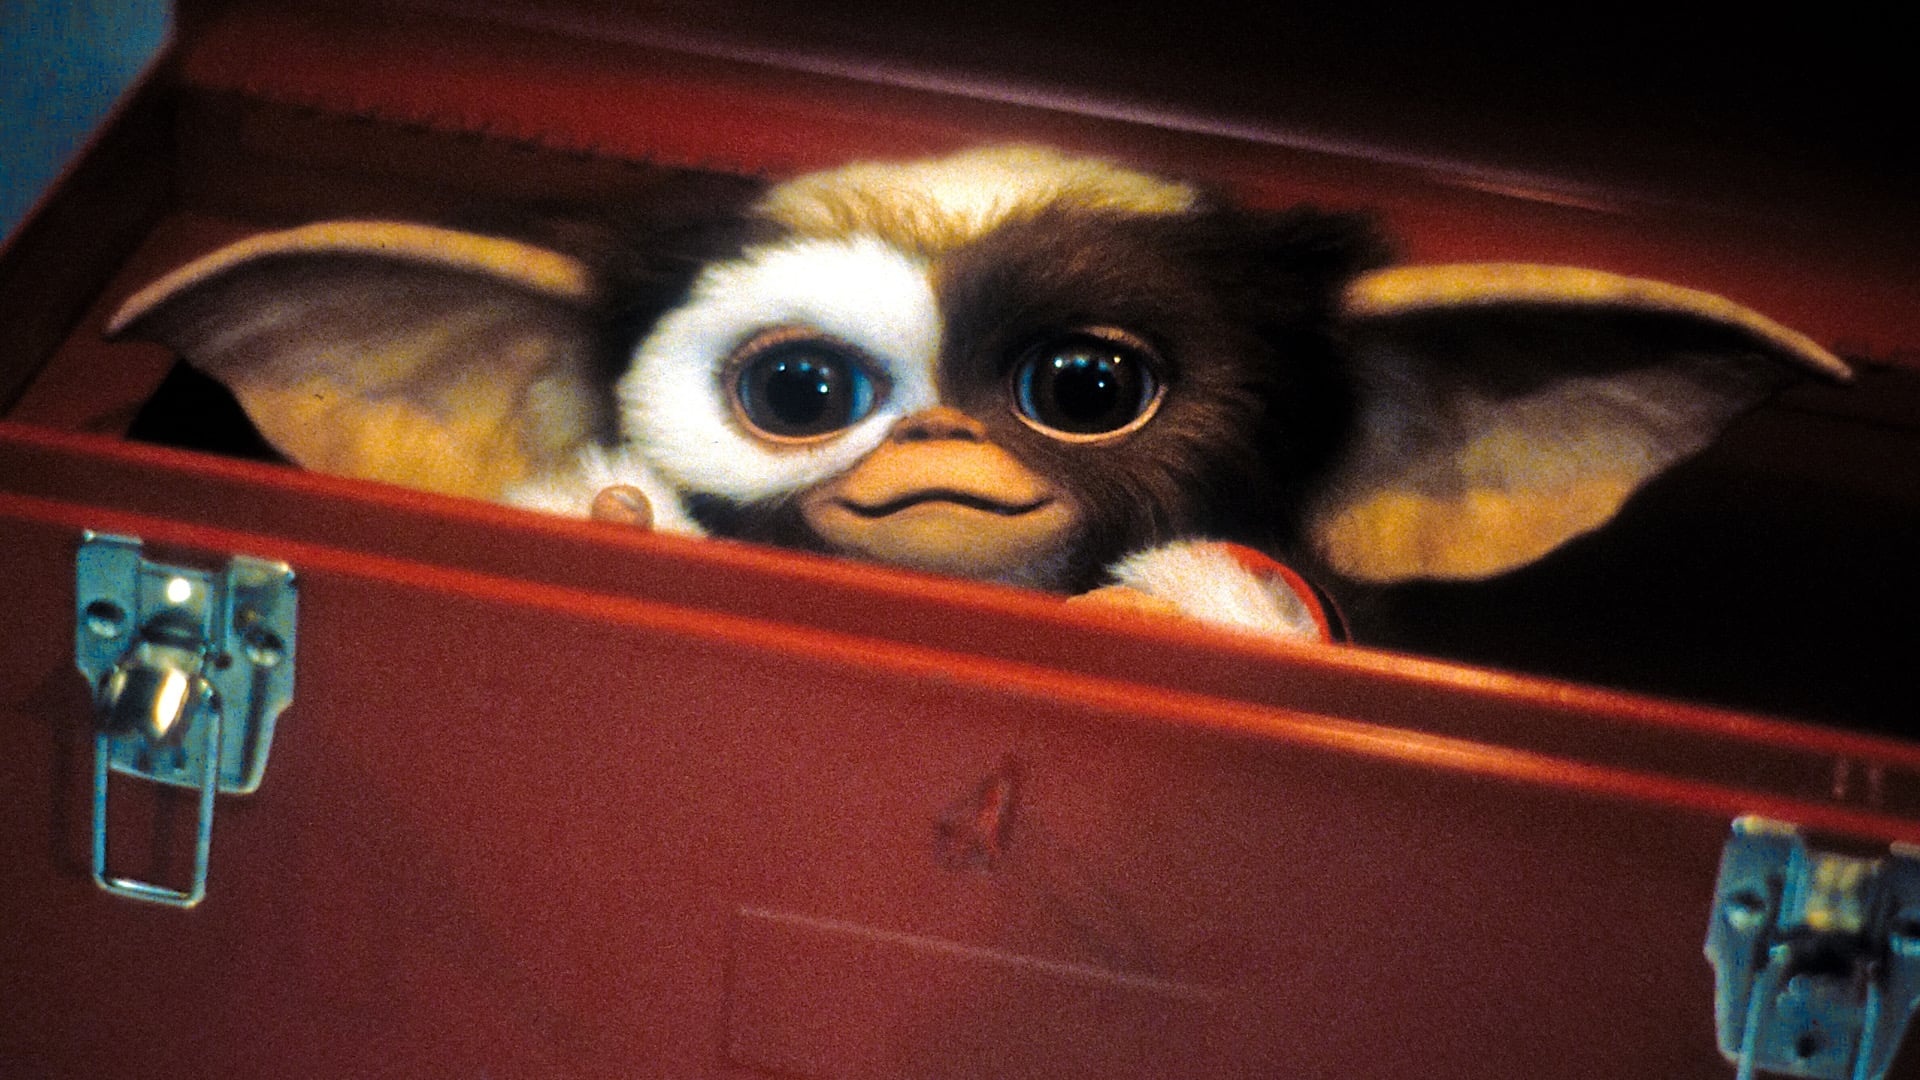 Gremlin Gizmo: The creature was created by special effects artist Chris Walas. 1920x1080 Full HD Wallpaper.